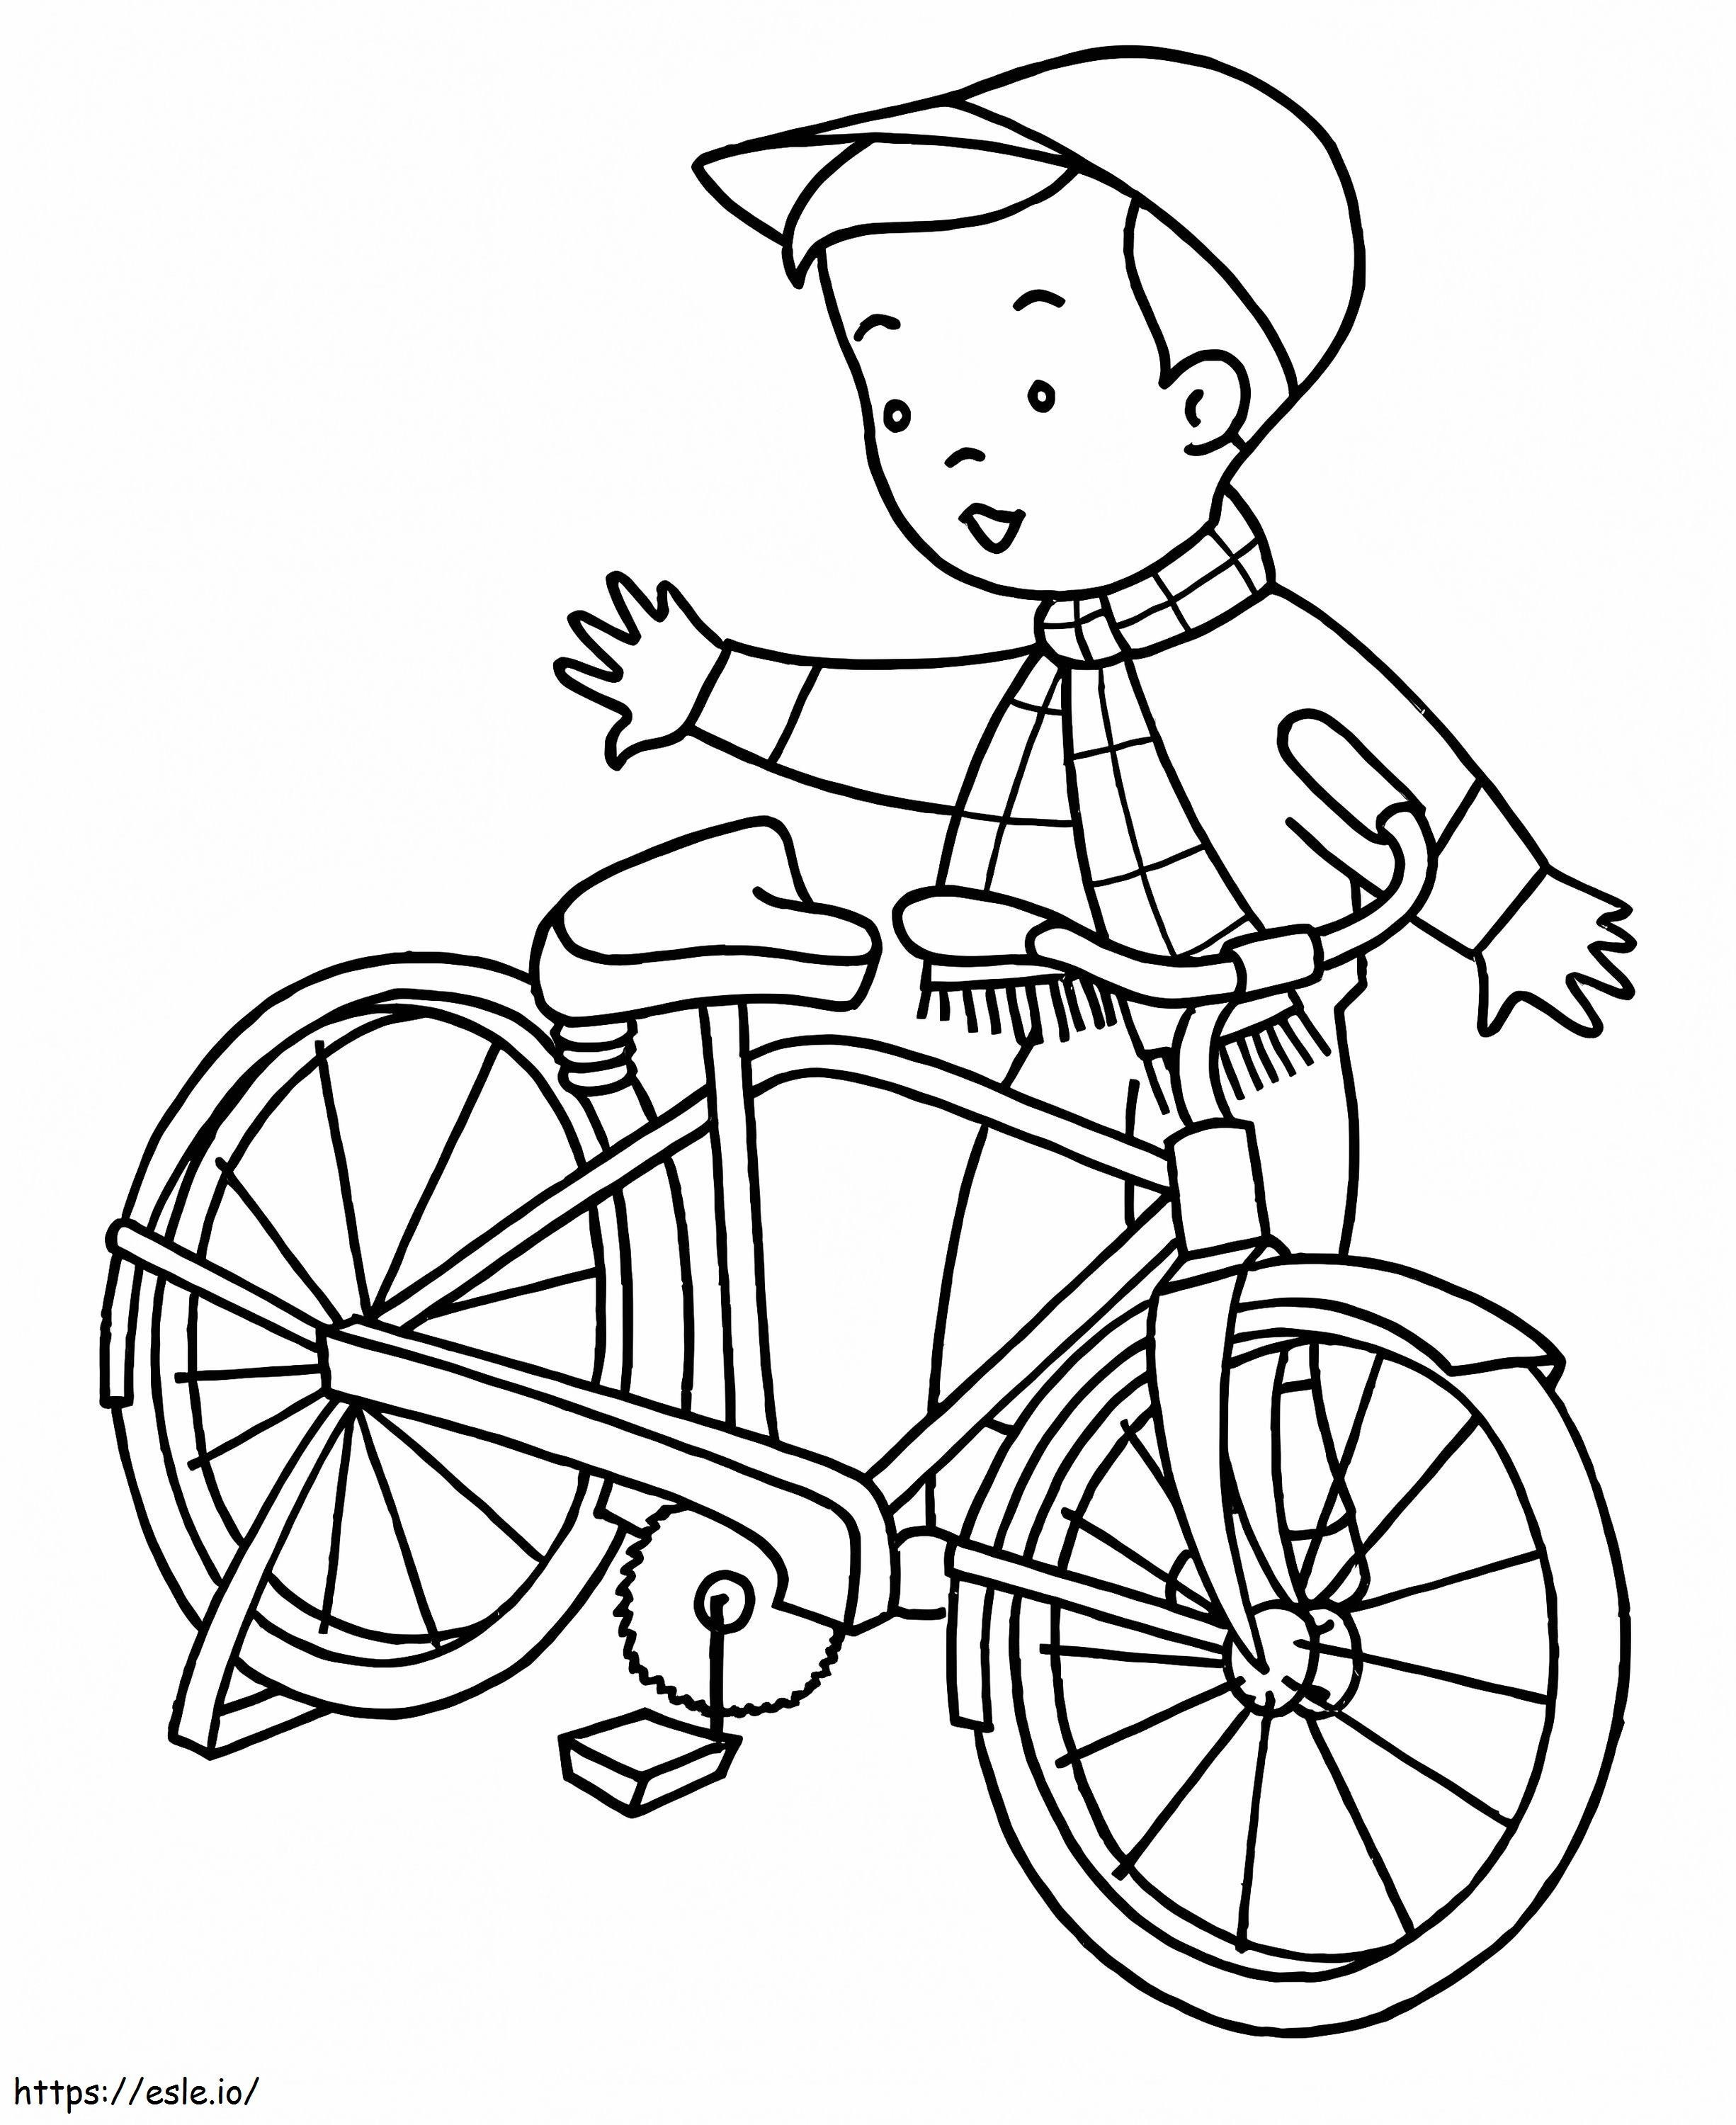 Christmas Bicycle For Children coloring page